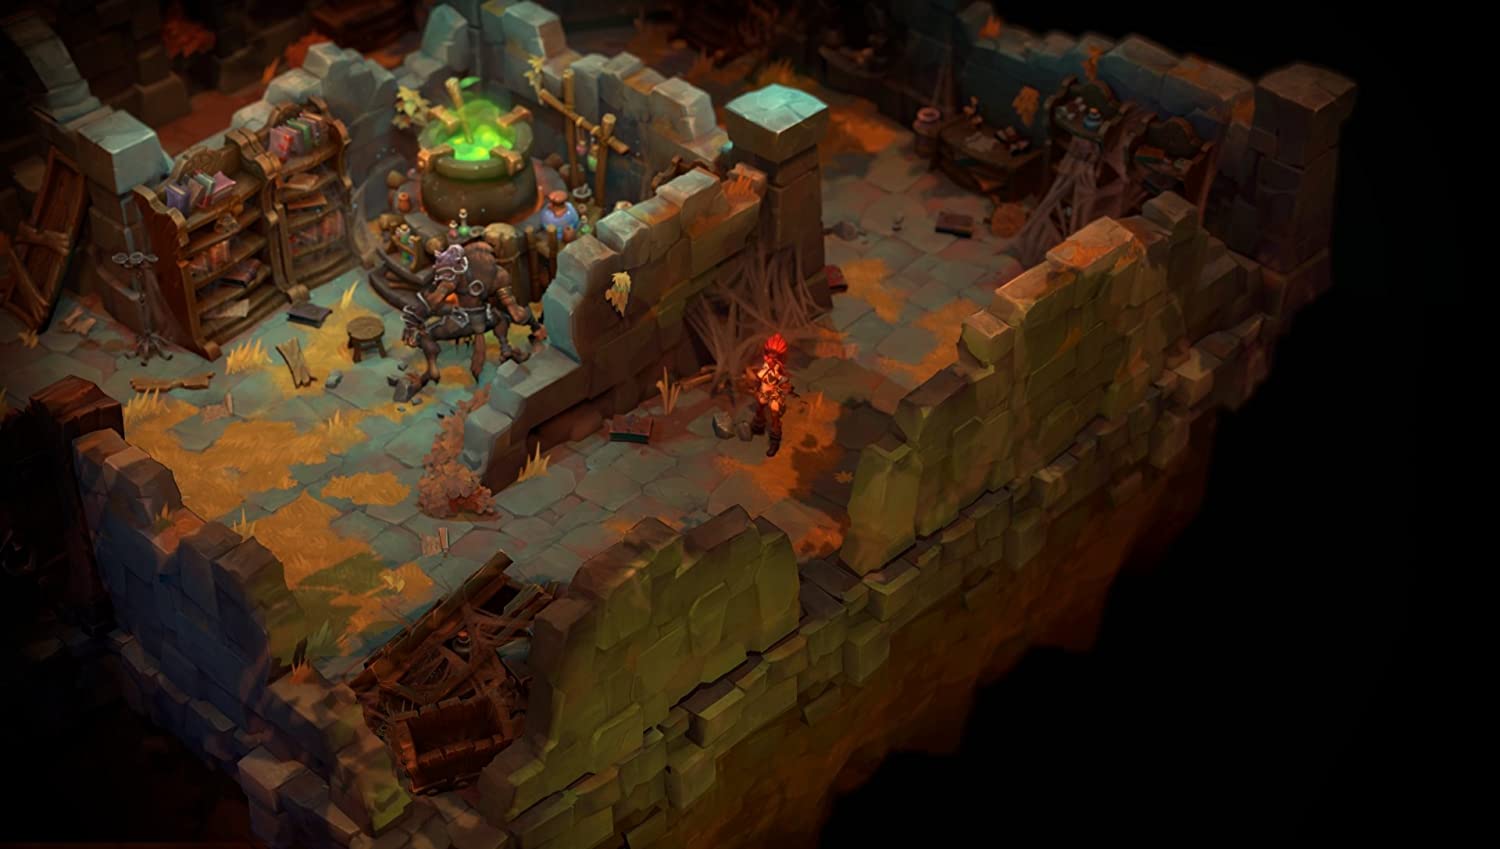 battle-chasers-pic2